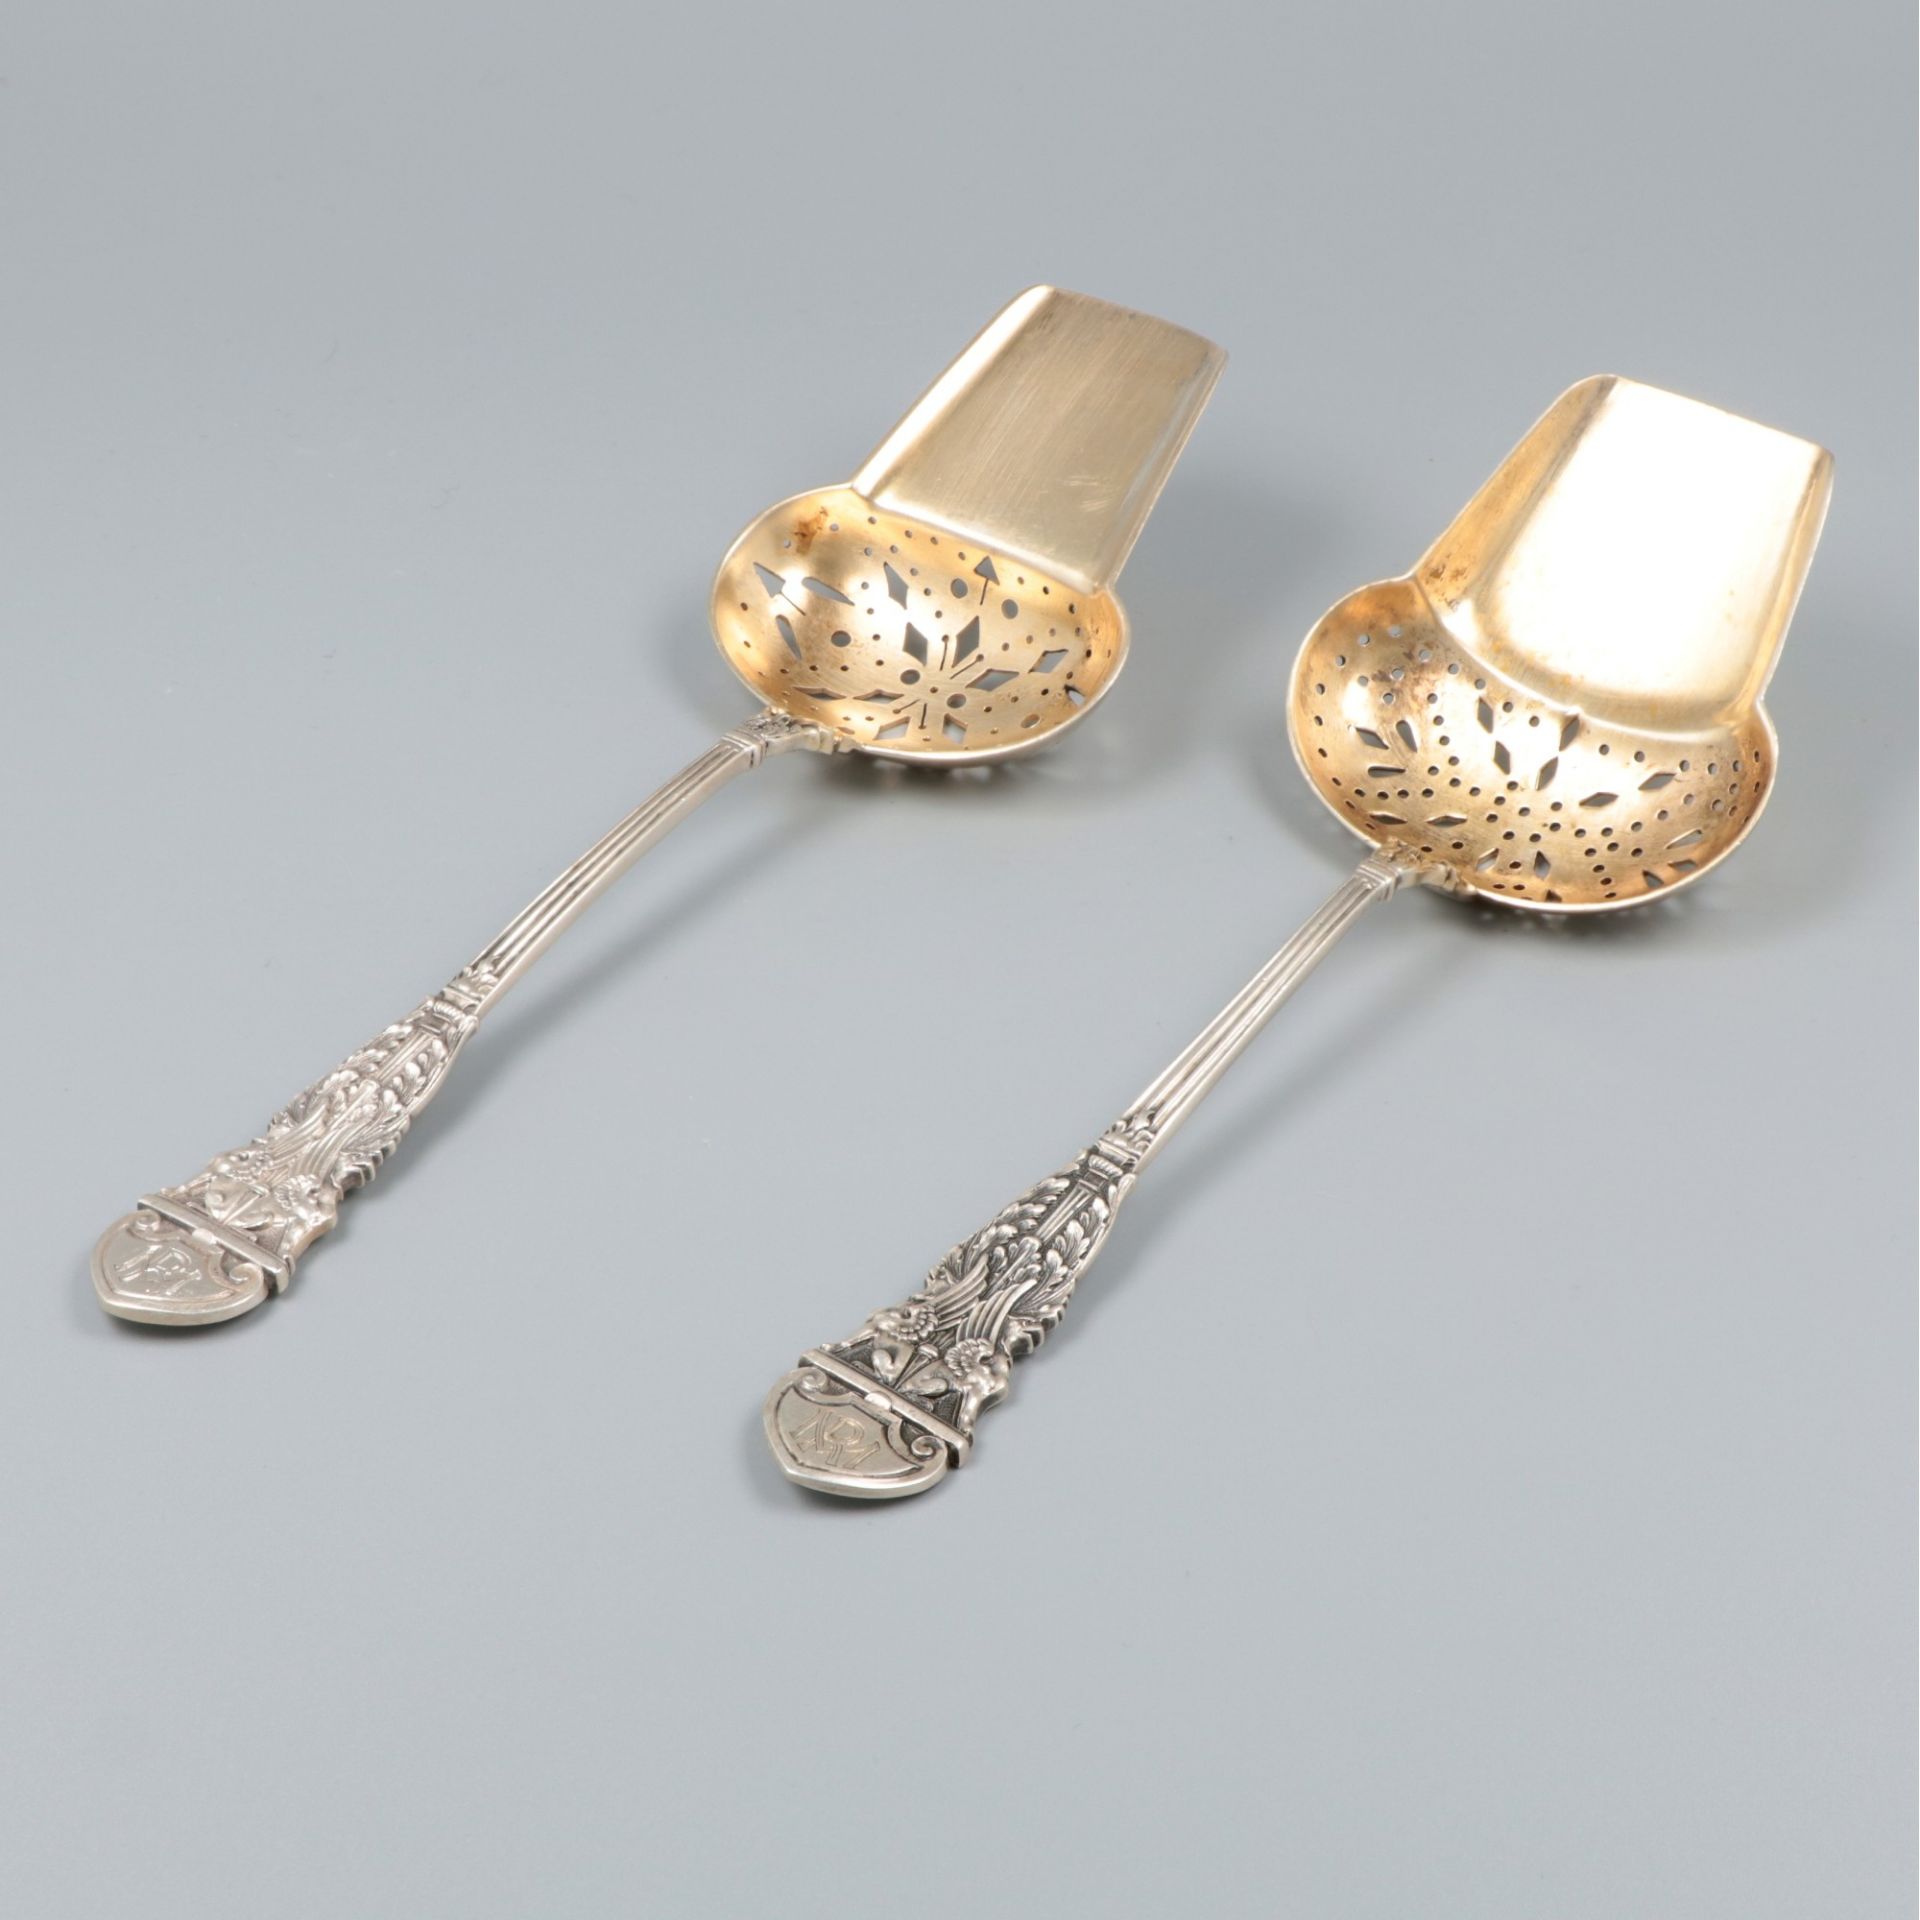 2-piece set of silver serving spoons.